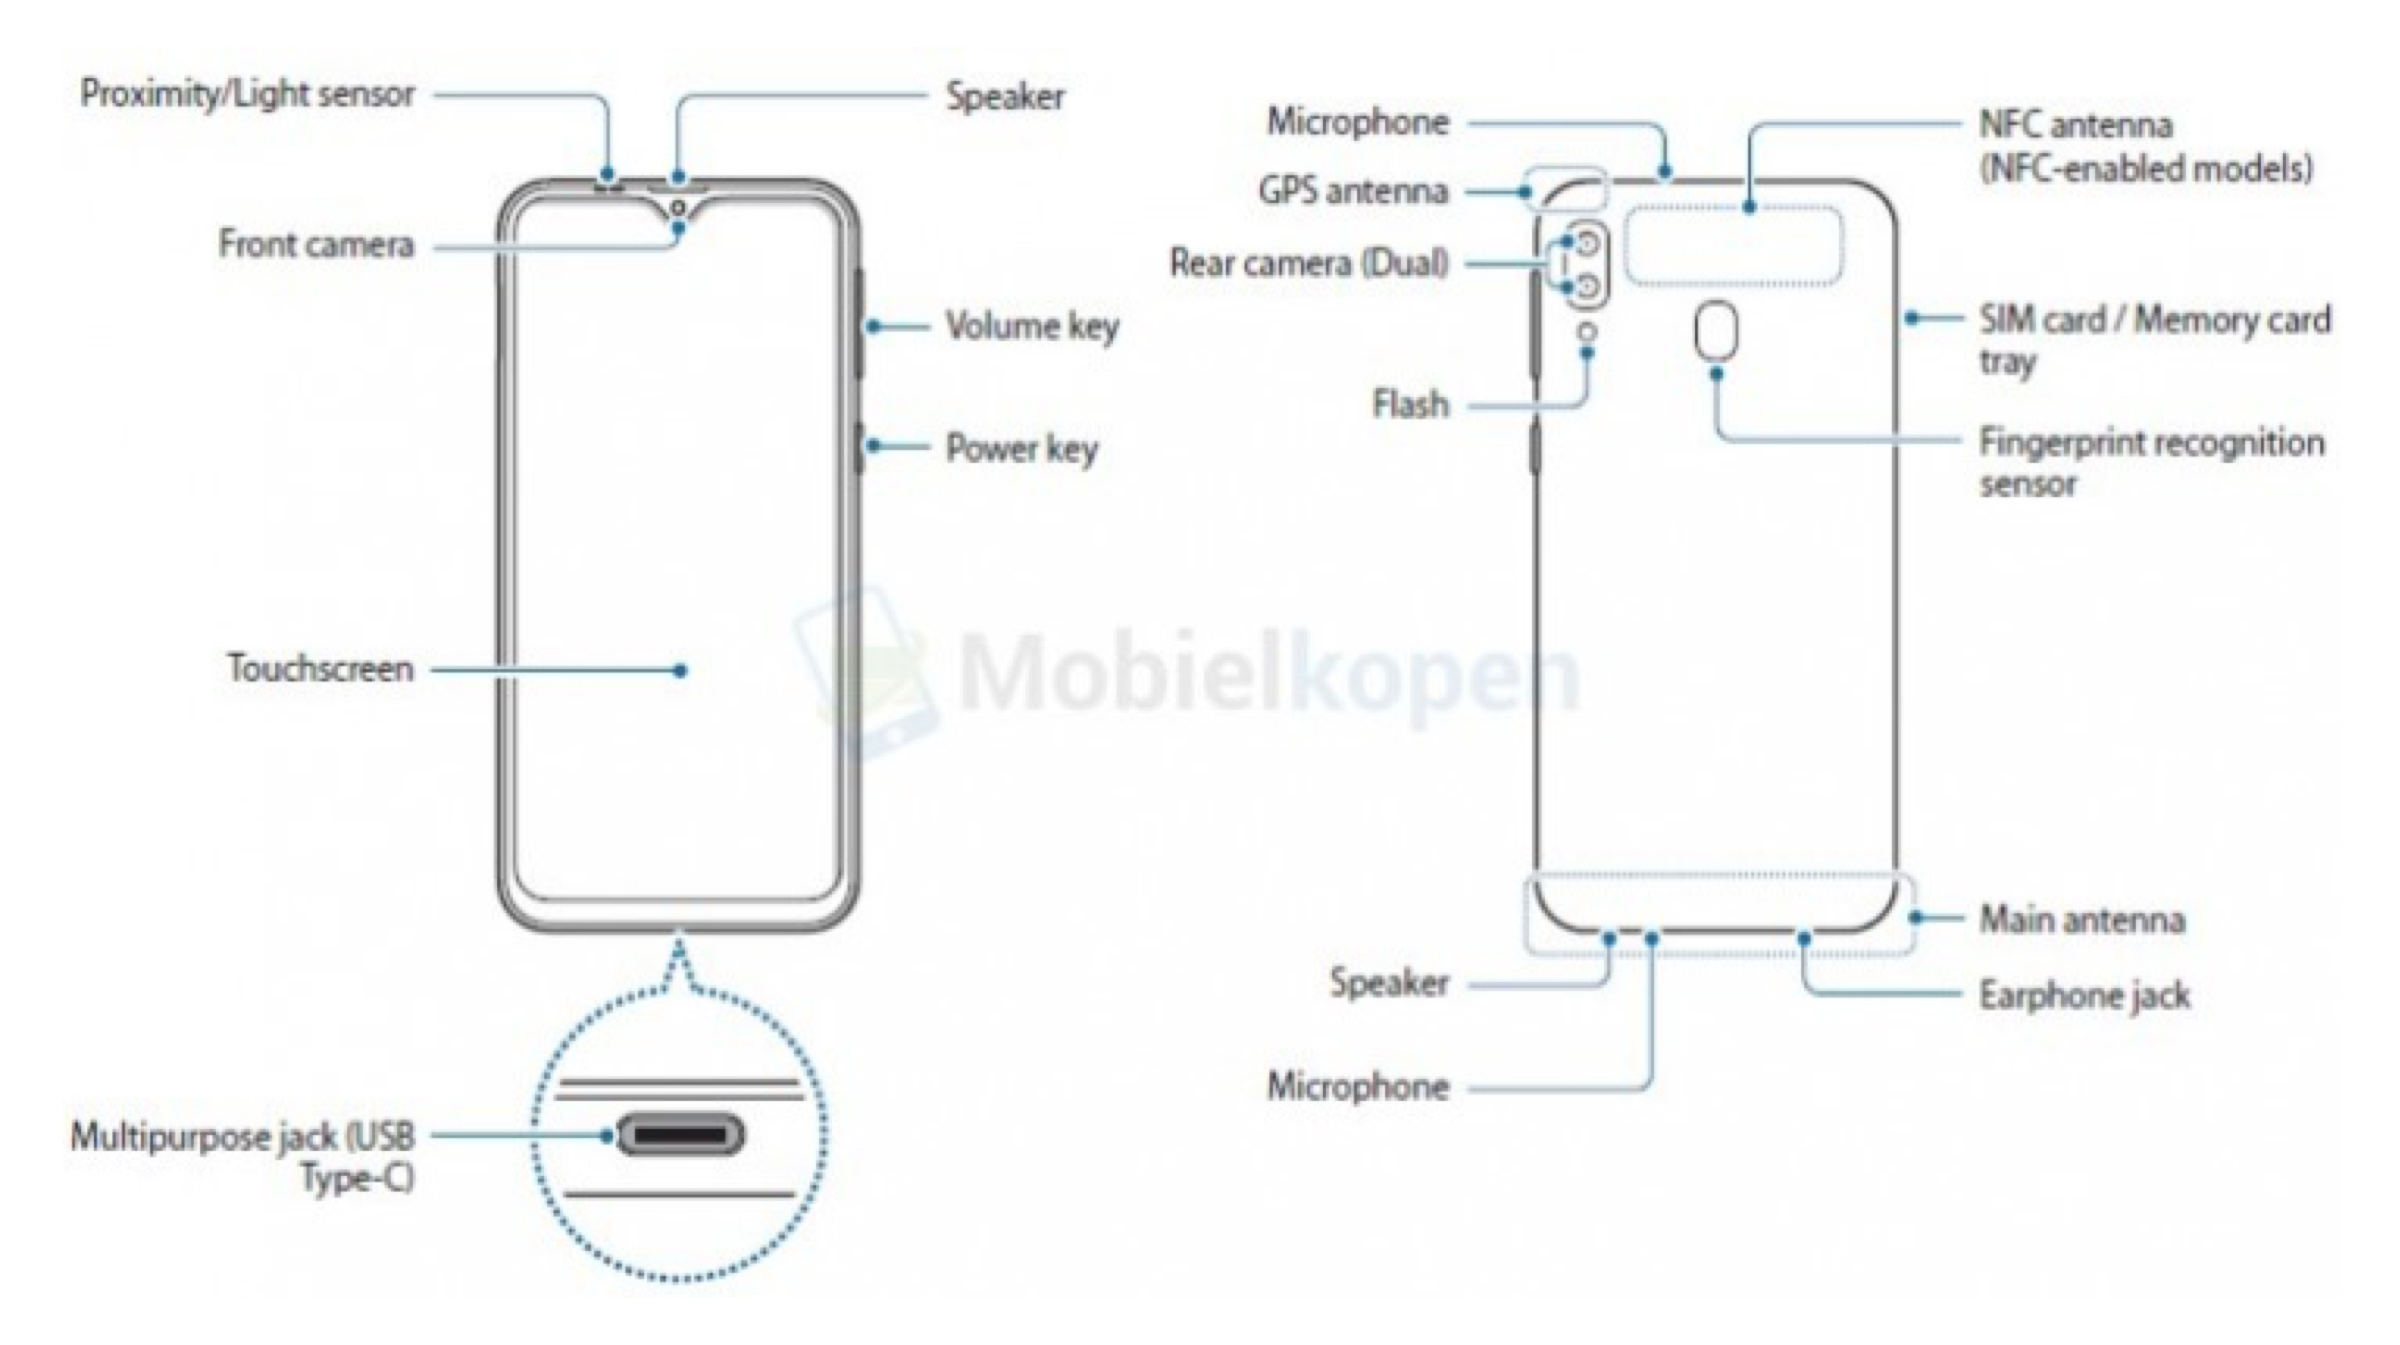 Samsung Galaxy M20 User Manual Leaked, Full Details | iGyaan Network